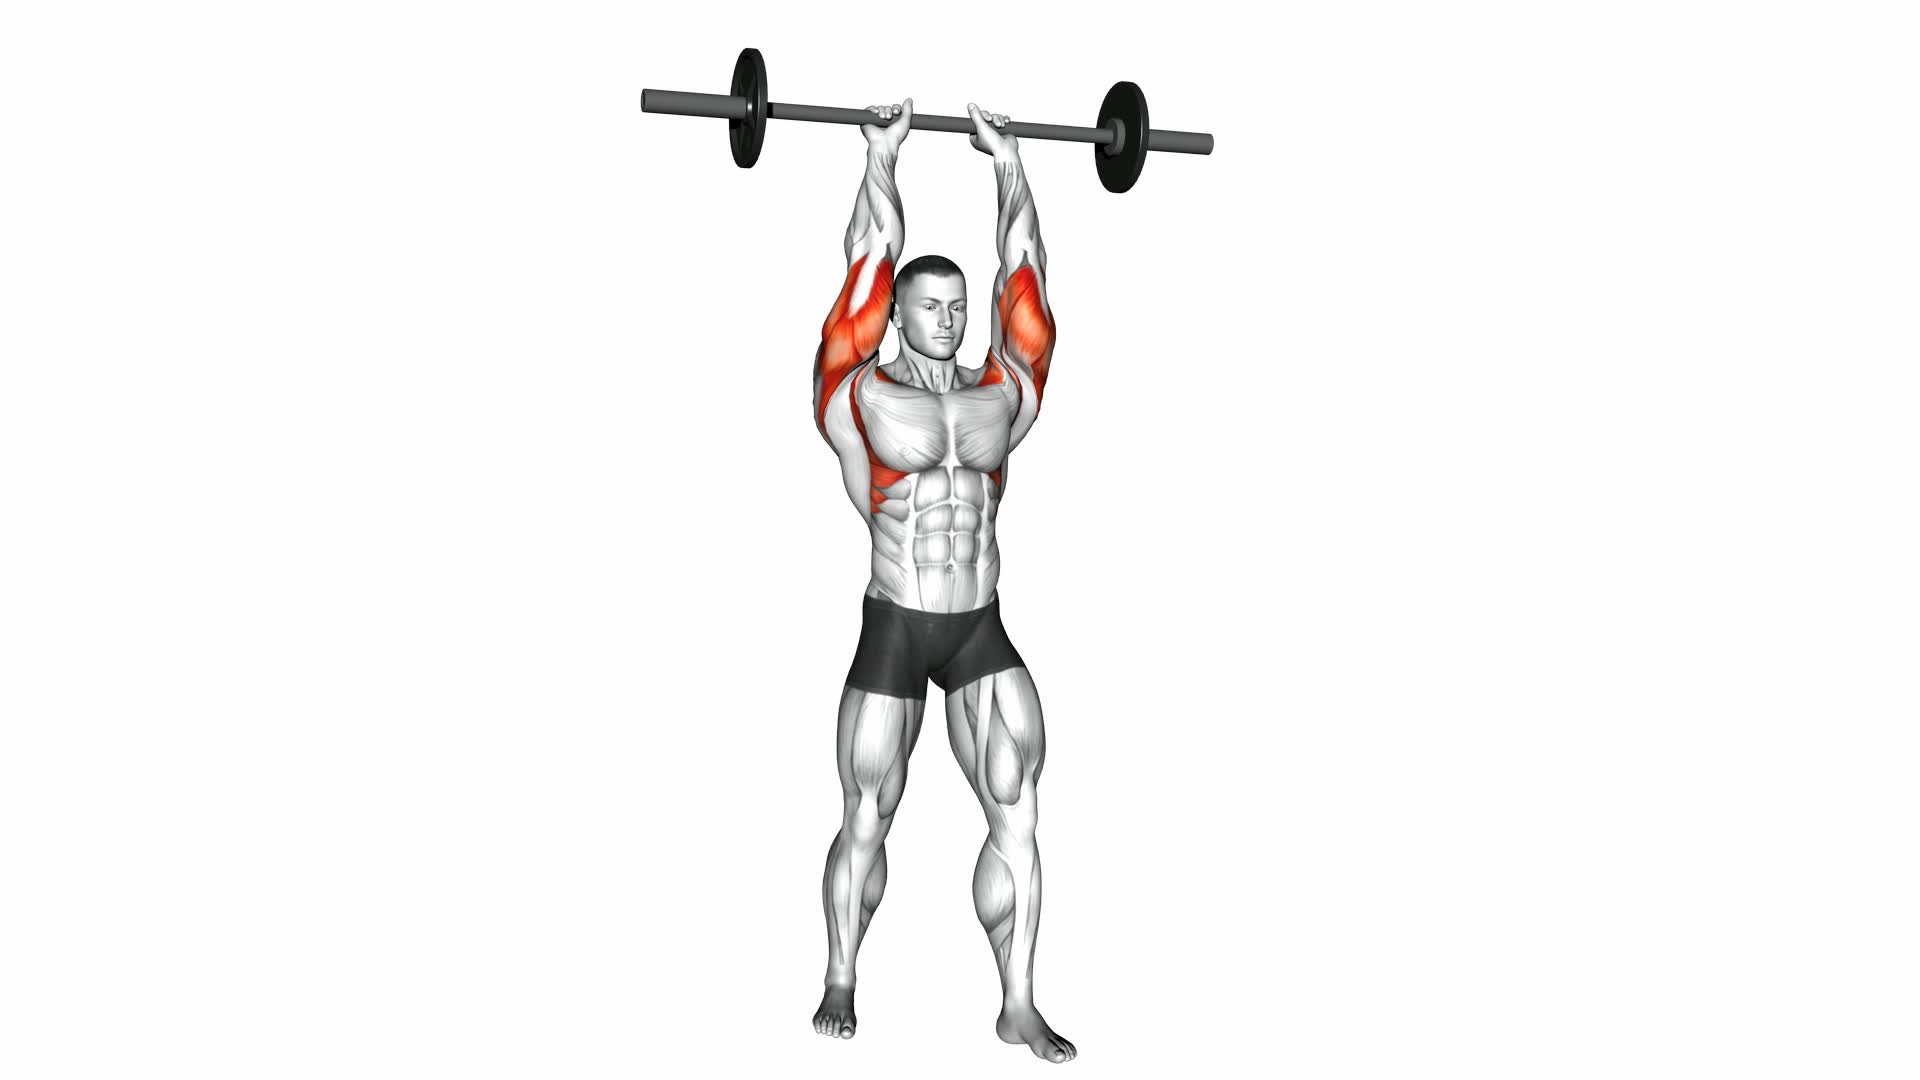 Barbell Standing Close Grip Military Press - Video Exercise Guide & Tips